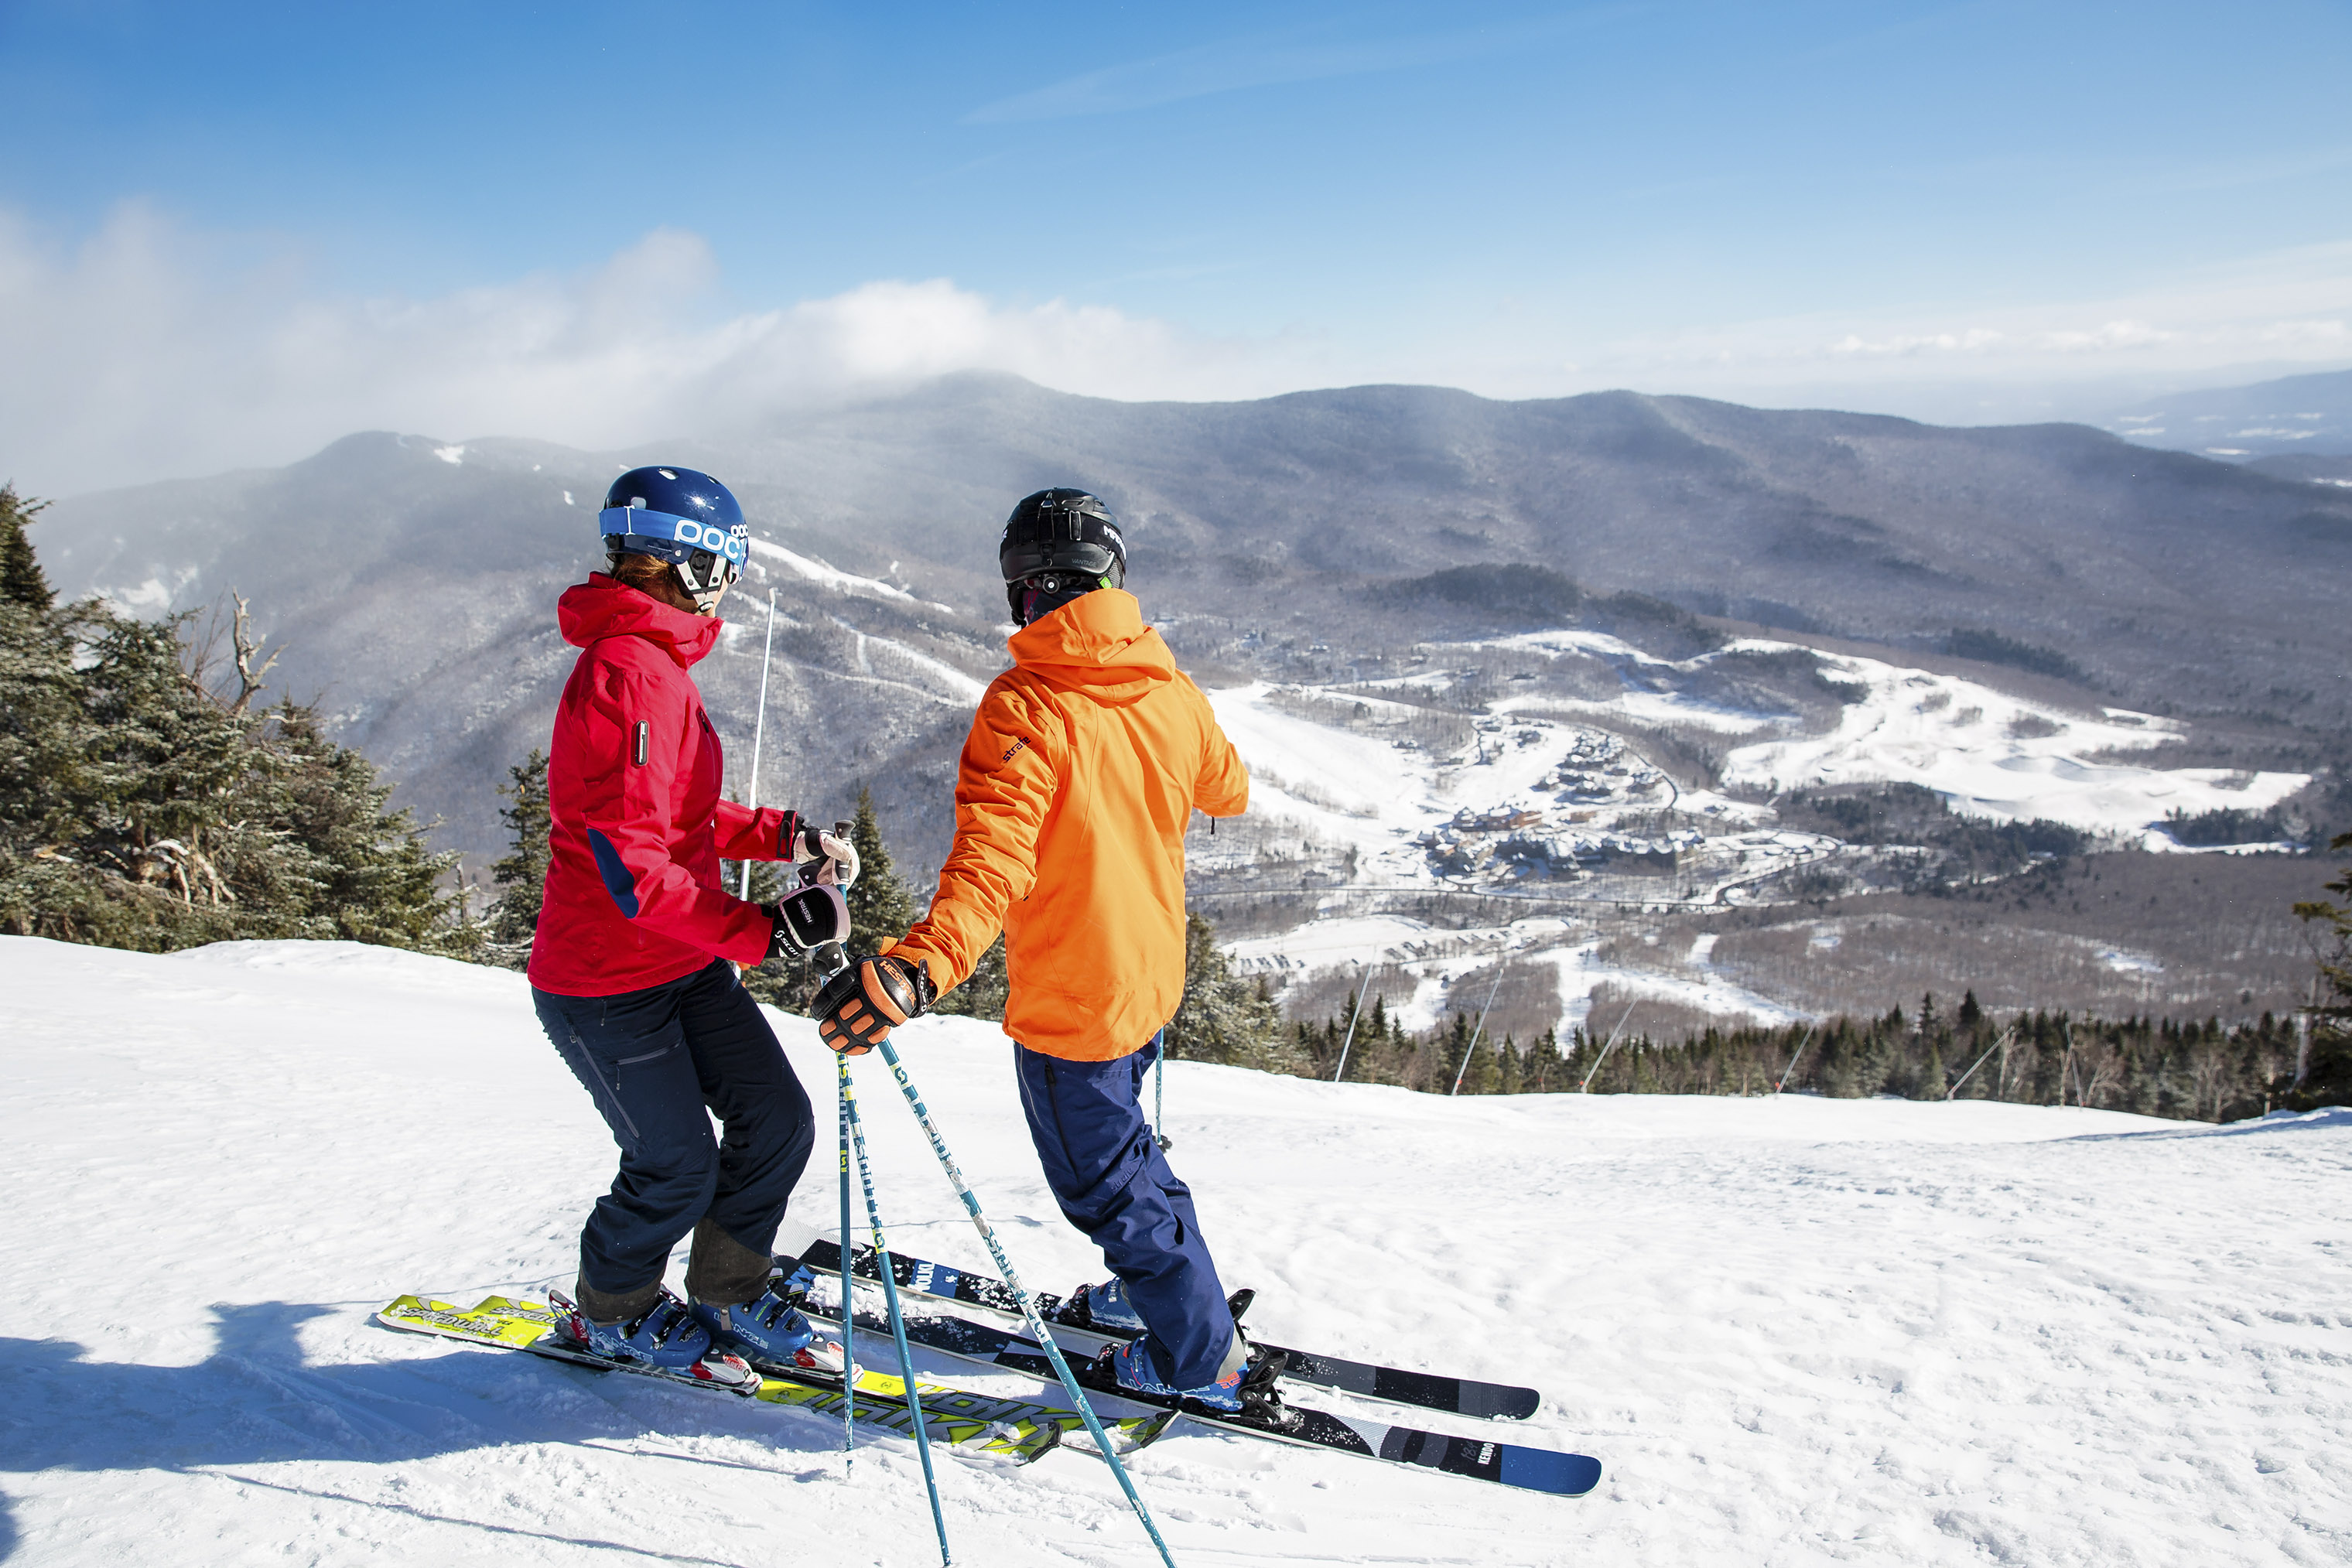 Stowe Mountain Resort remains open during all four seasons.